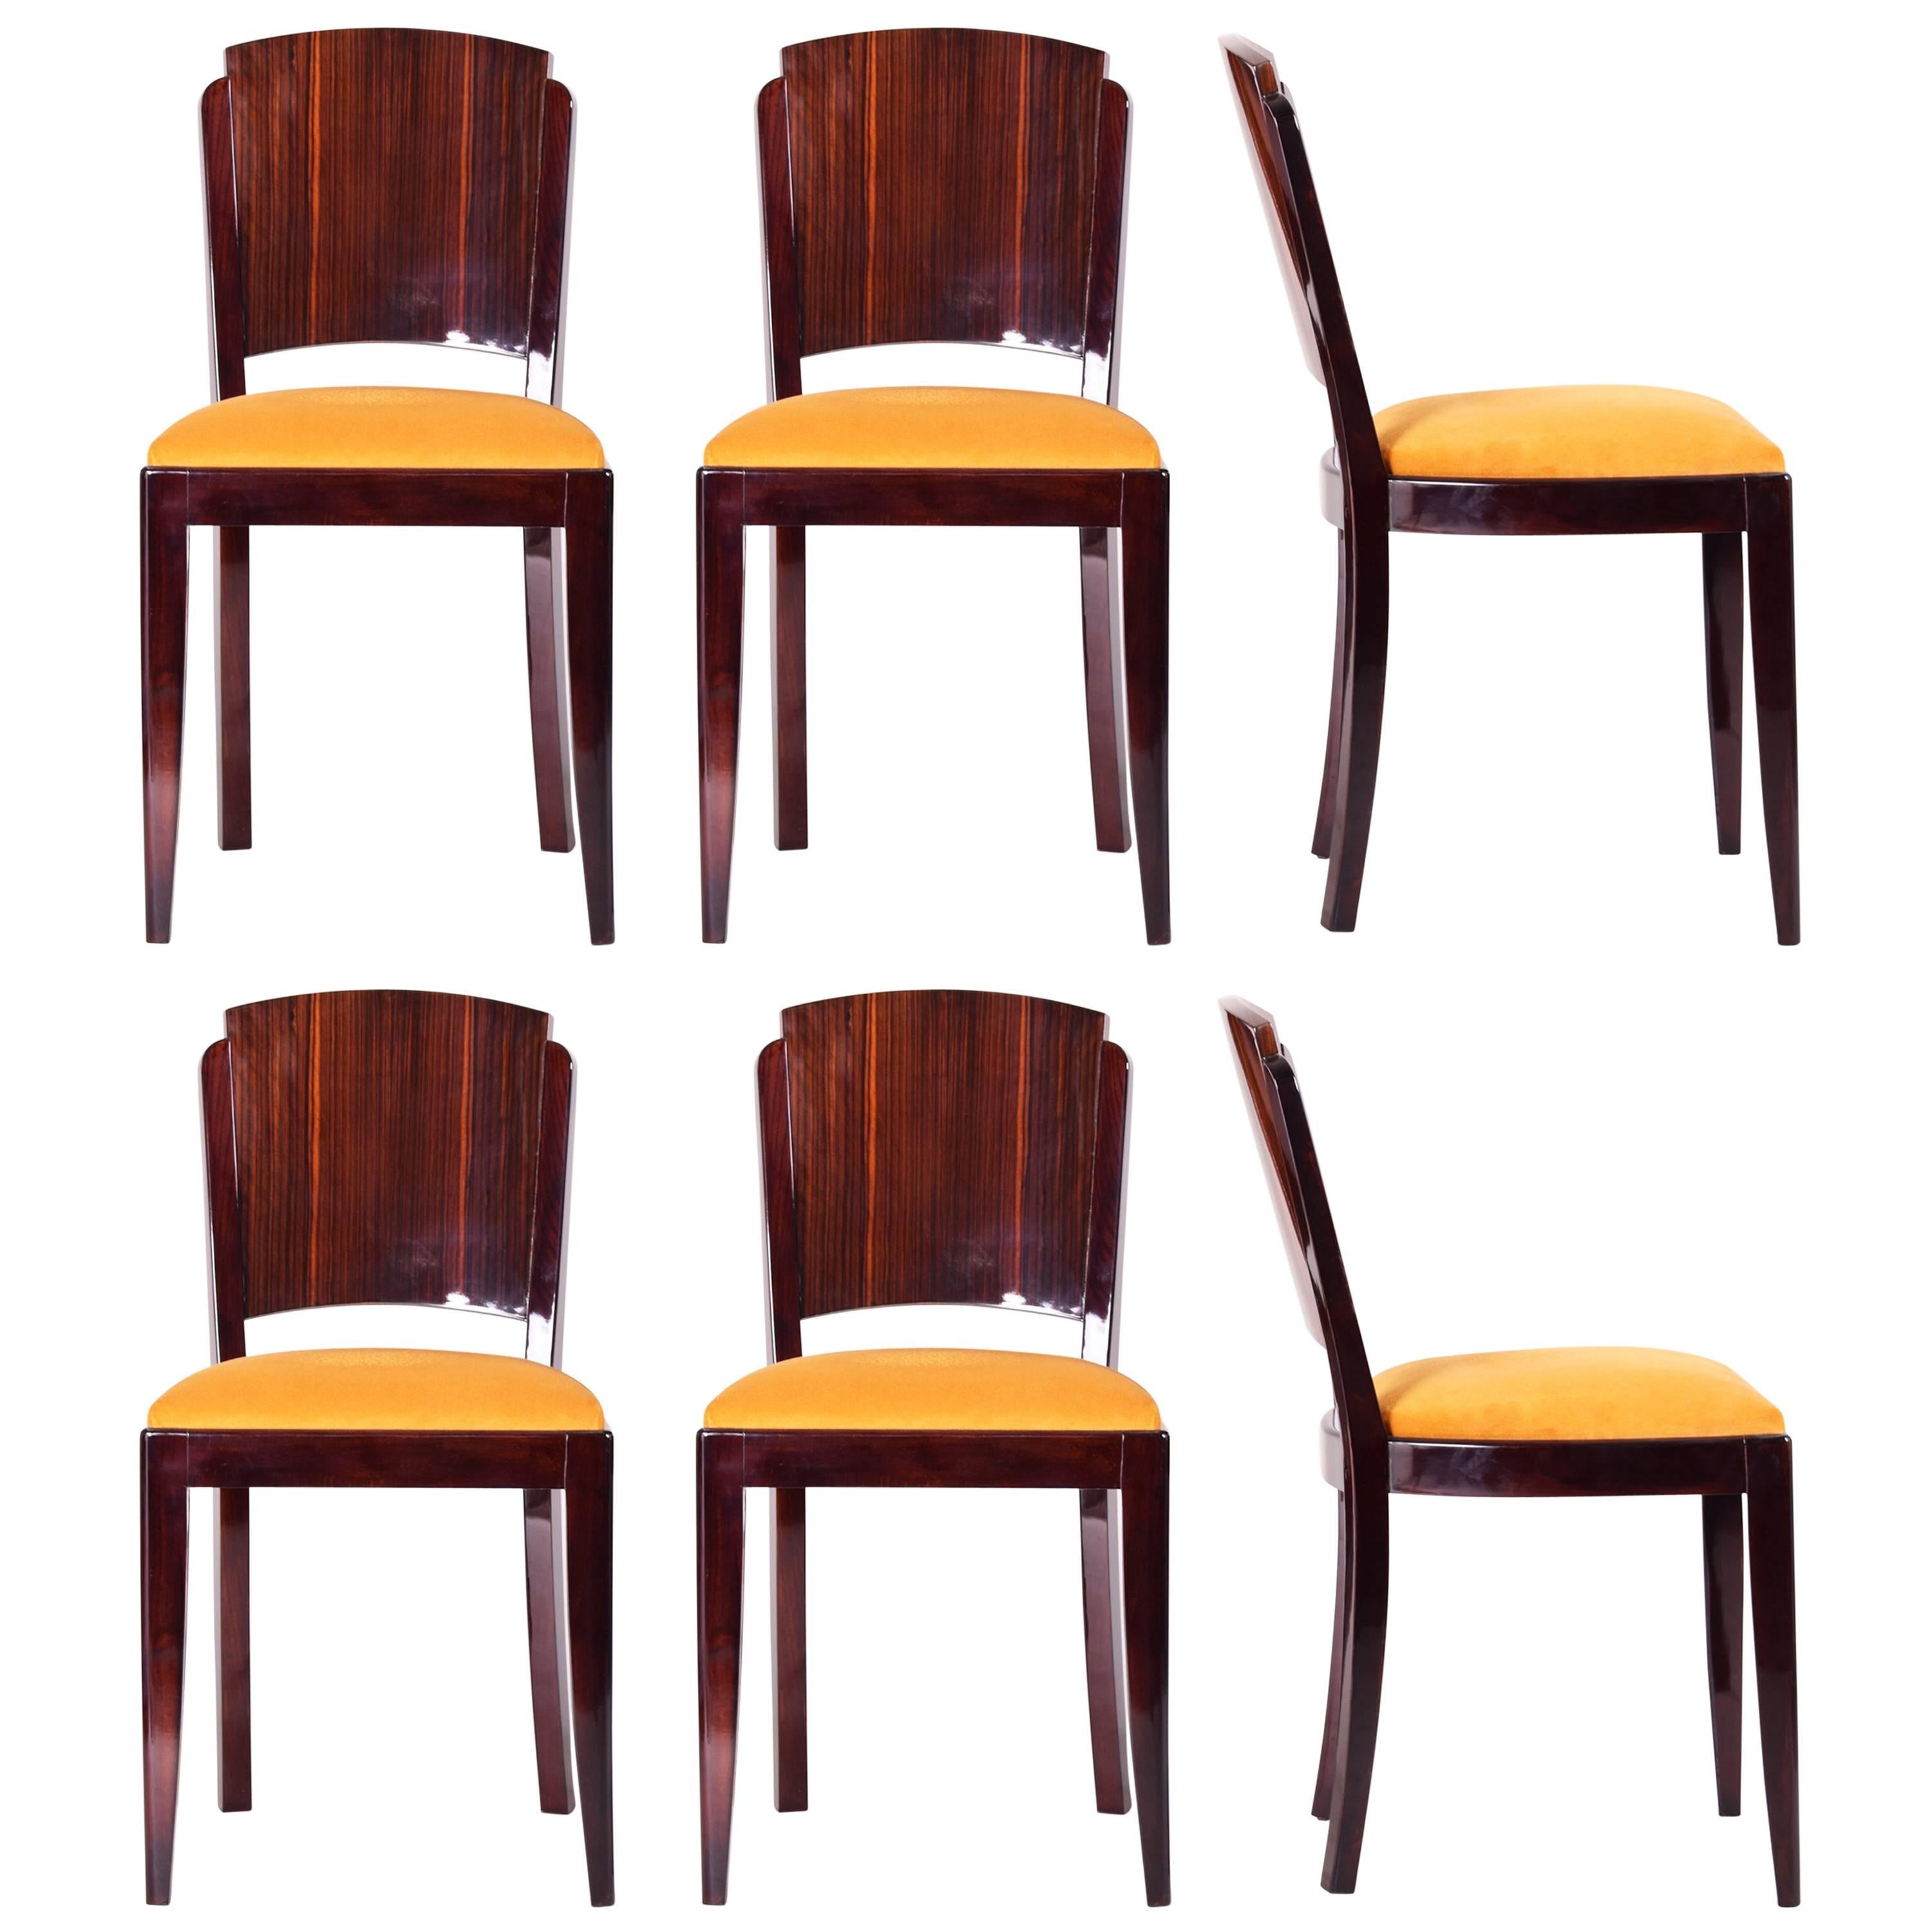 French Set of Chairs, Six Pieces Designed by French Architect Jules Leleu